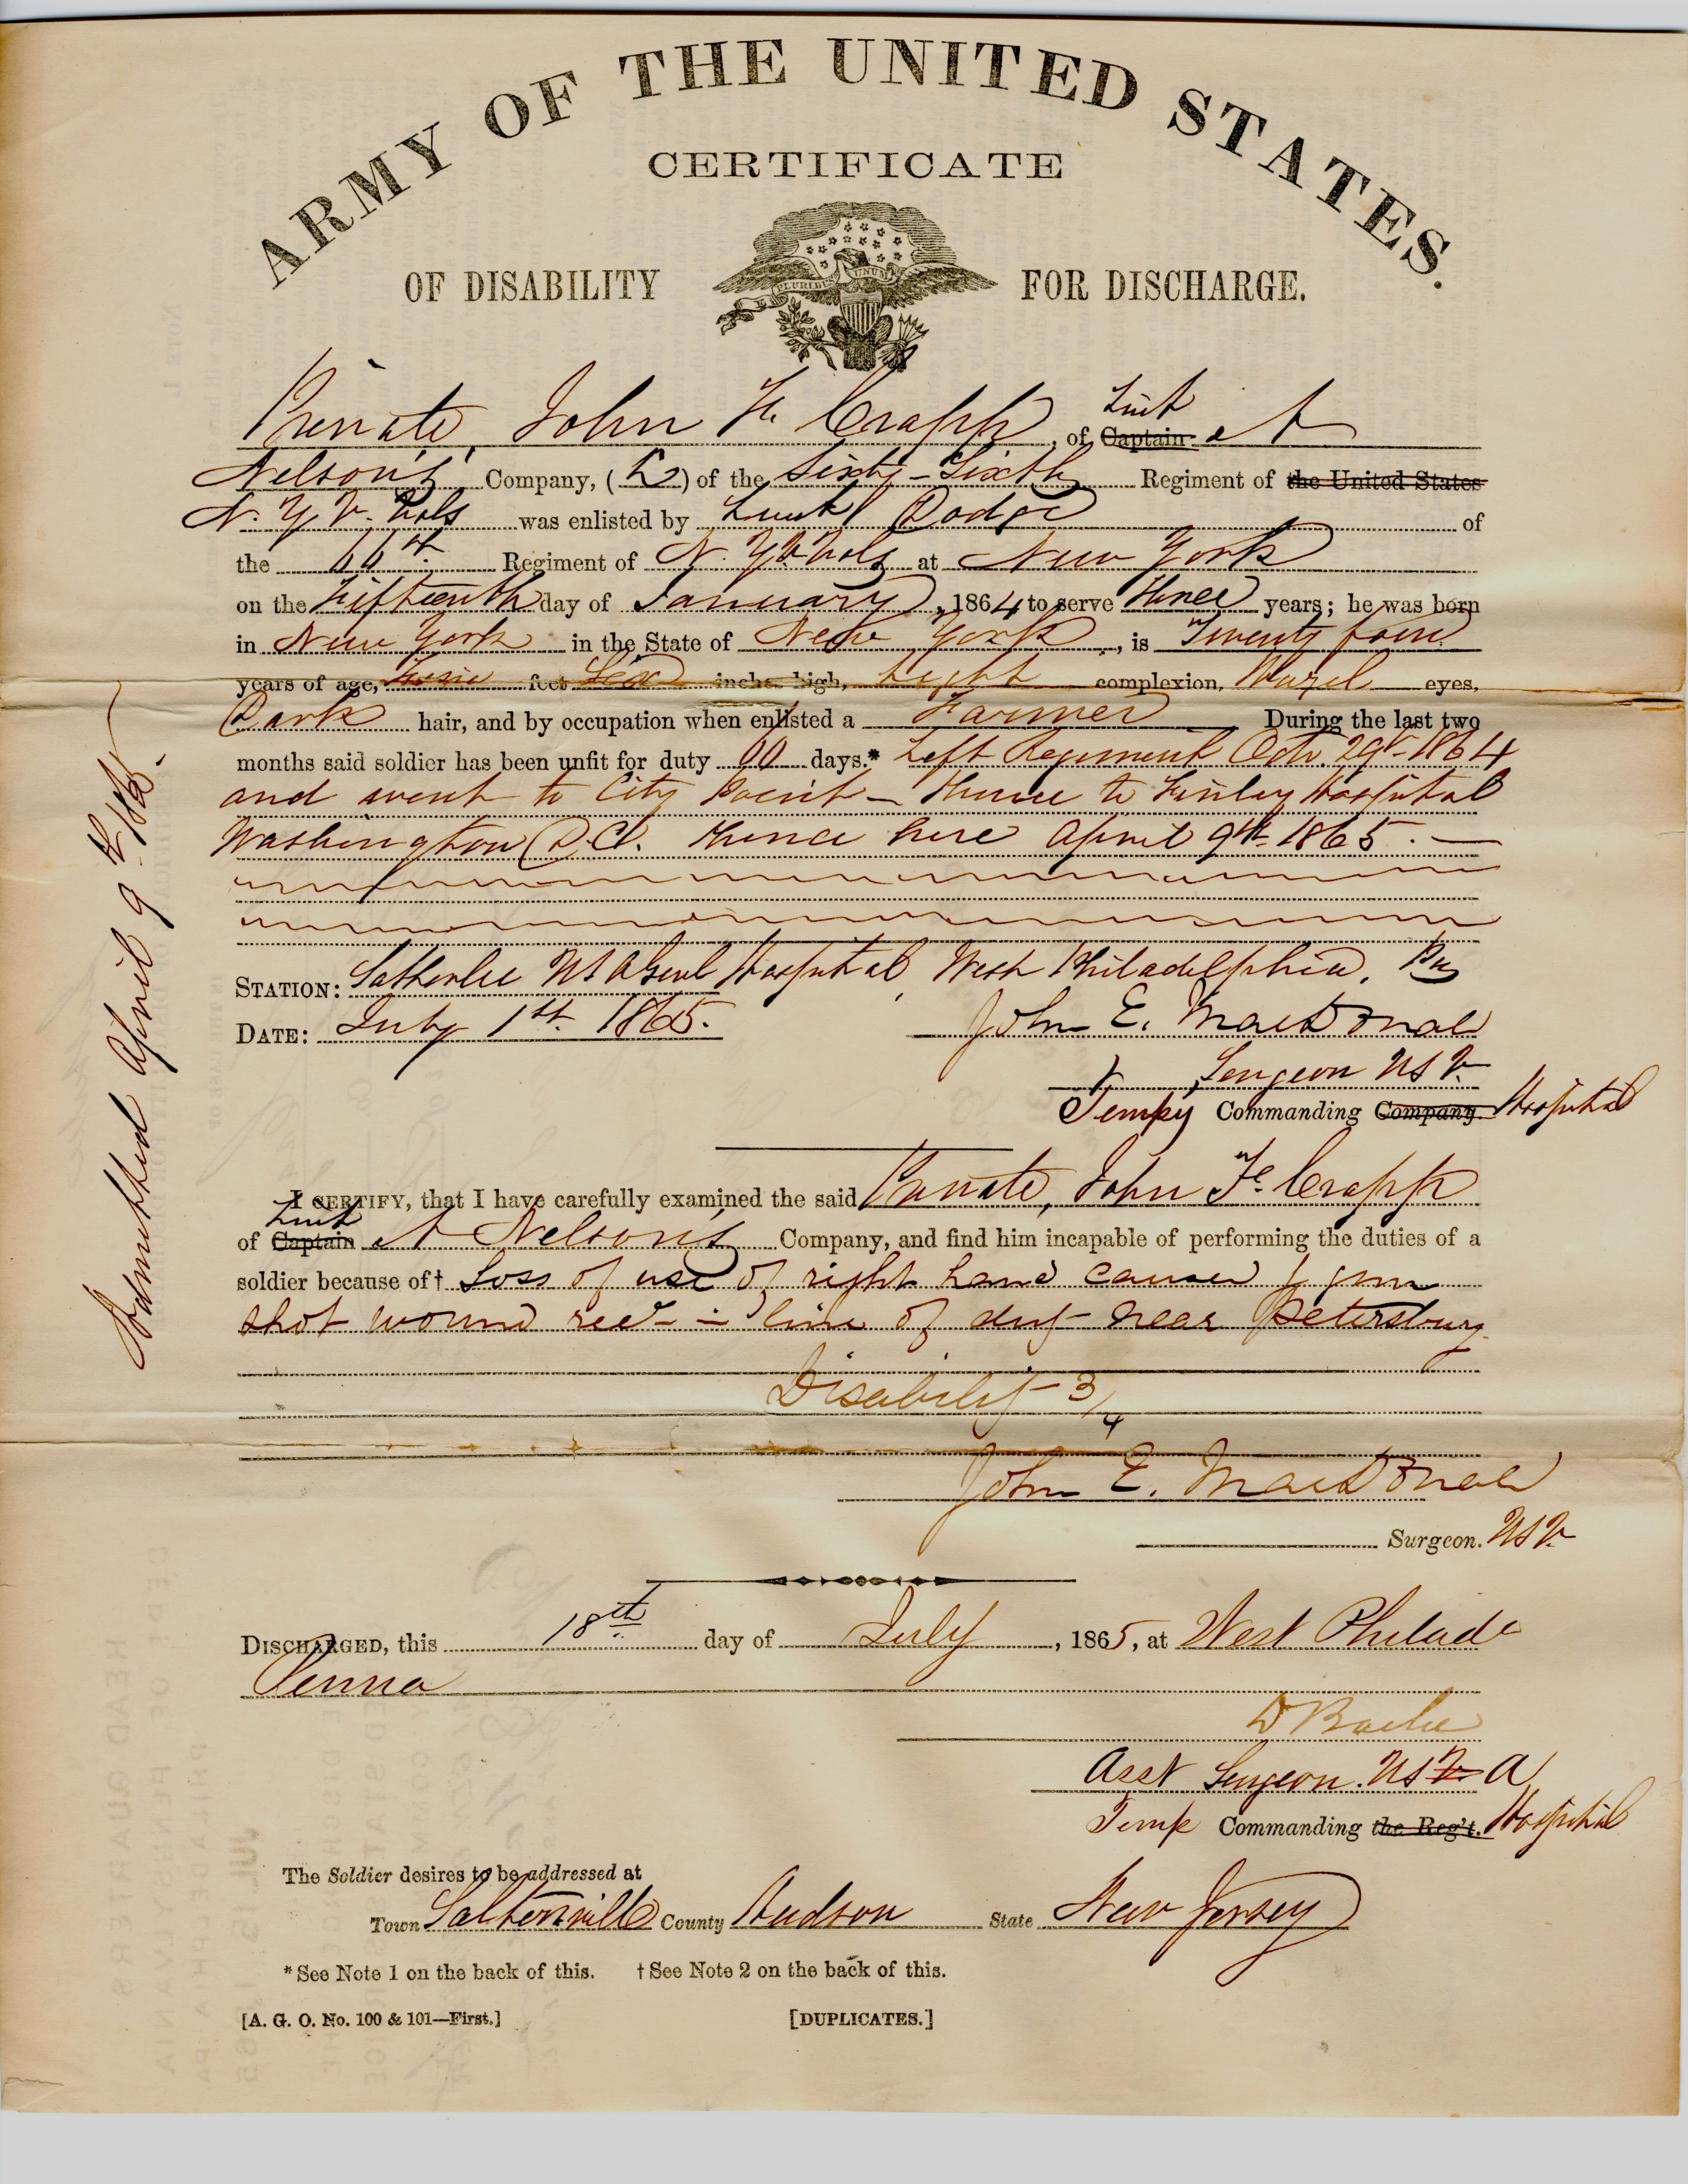 Image of a certificate of disability for discharge